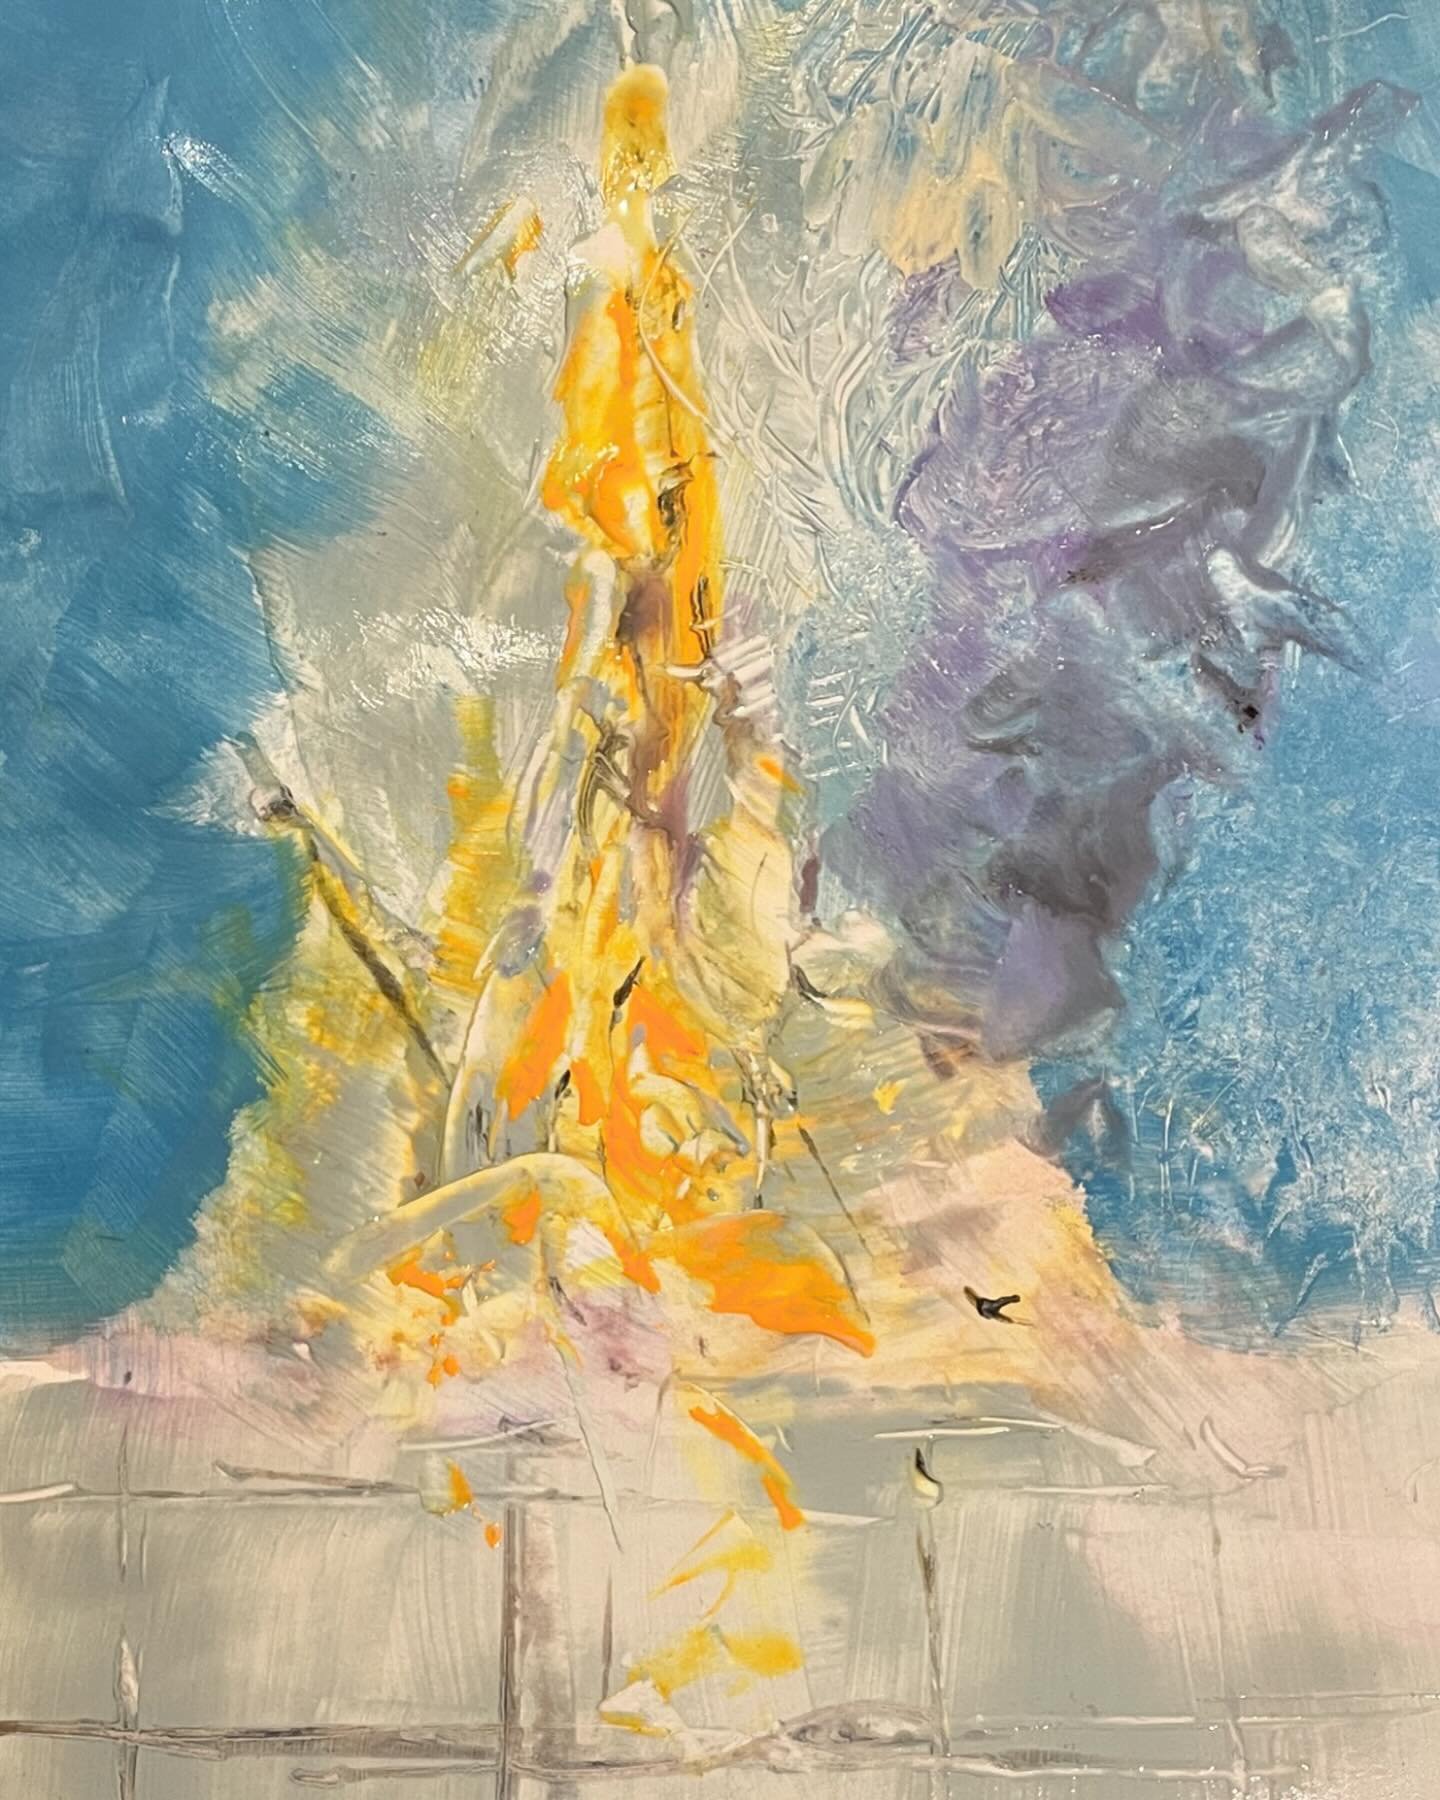 Sitting here painting / reflecting on the day. The historic Copenhagen Stock exchange goes up in flames. A beautiful building with an iconic dragon spire that was engulfed. A day many will remember. #b&oslash;rsen #copenhagen #acrylart #emergingartis